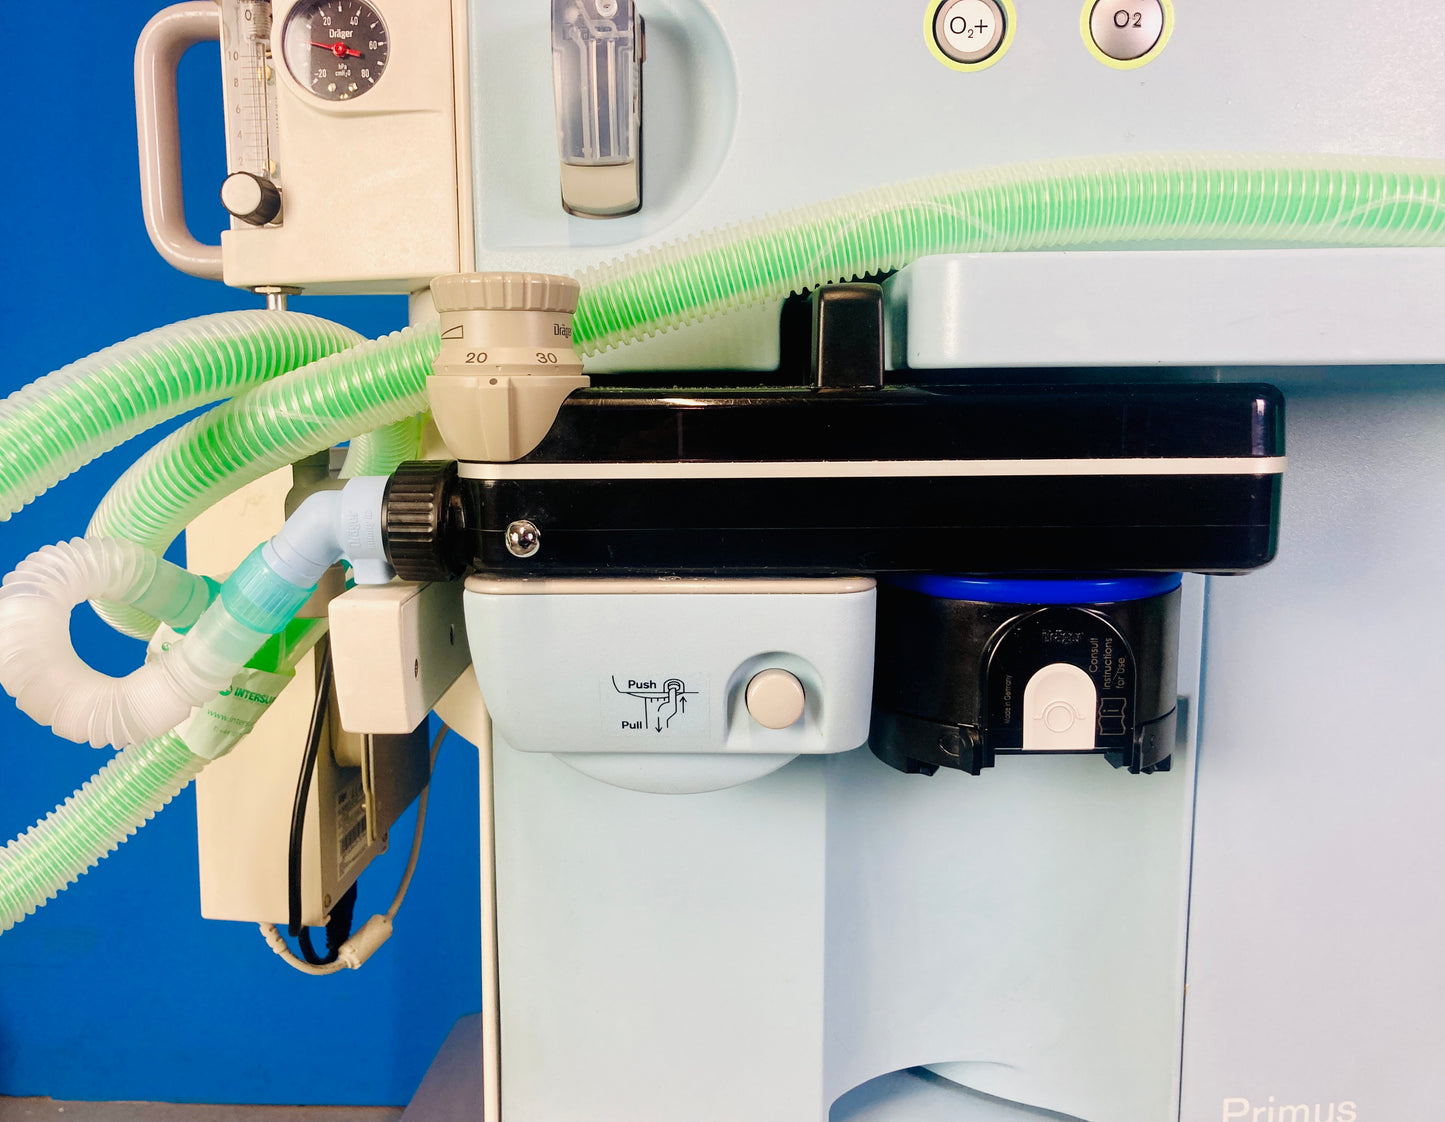 The breathing system is fully clicked into place, the breathing hoses are correctly and securely connected.